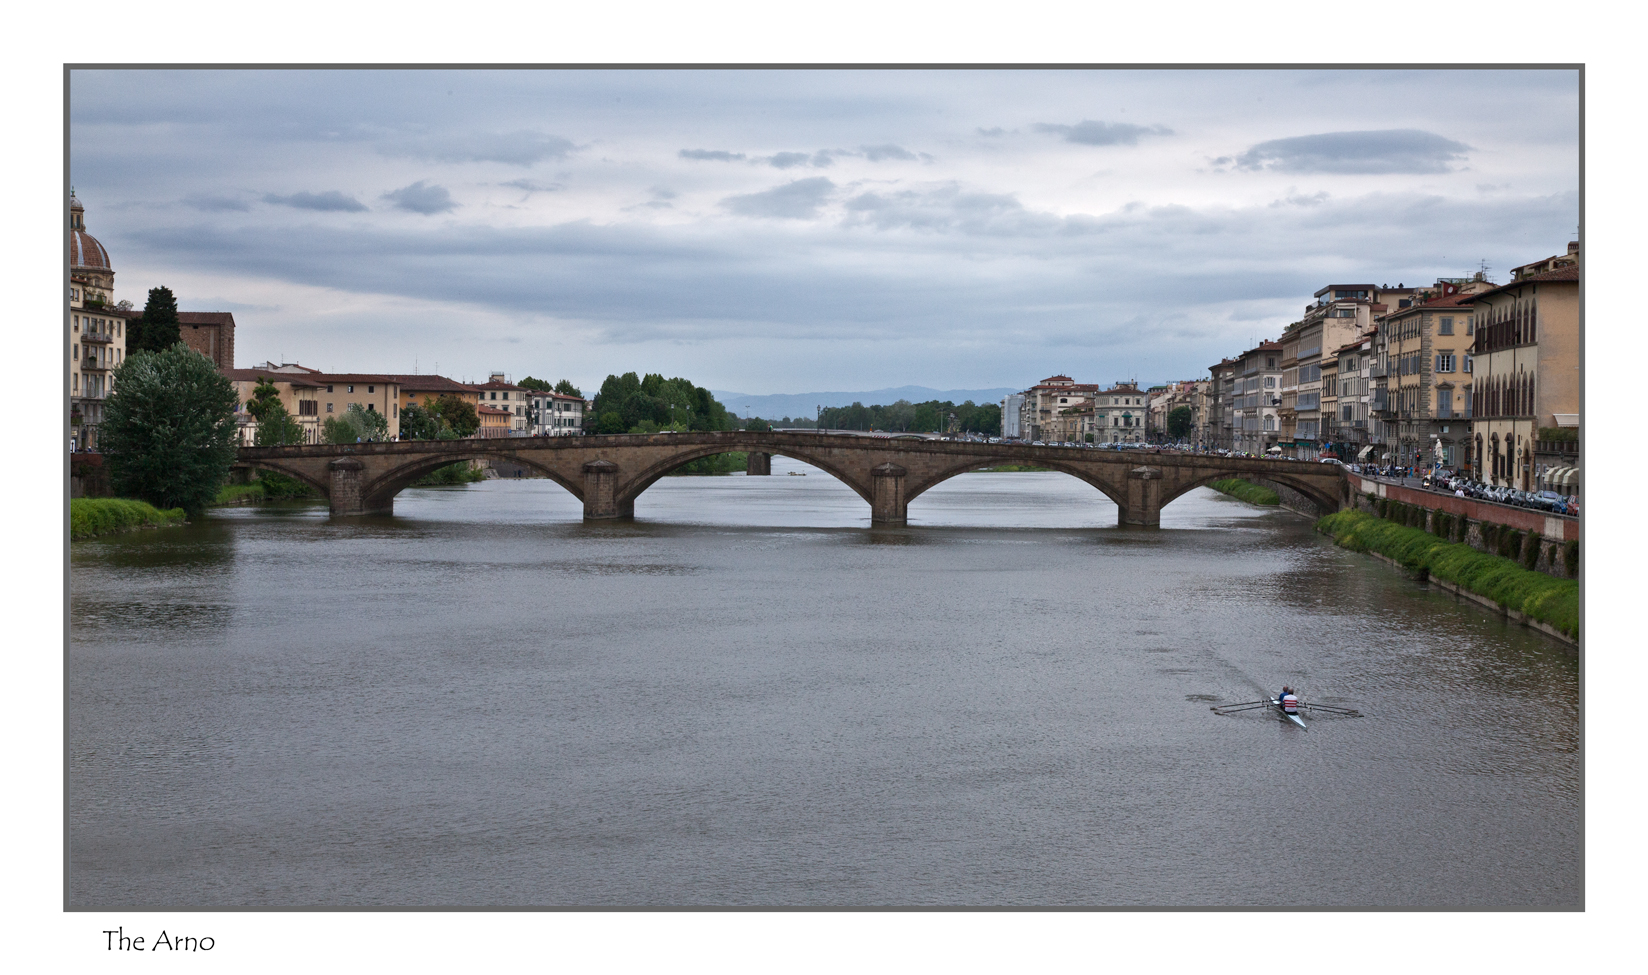 The Arno, evening